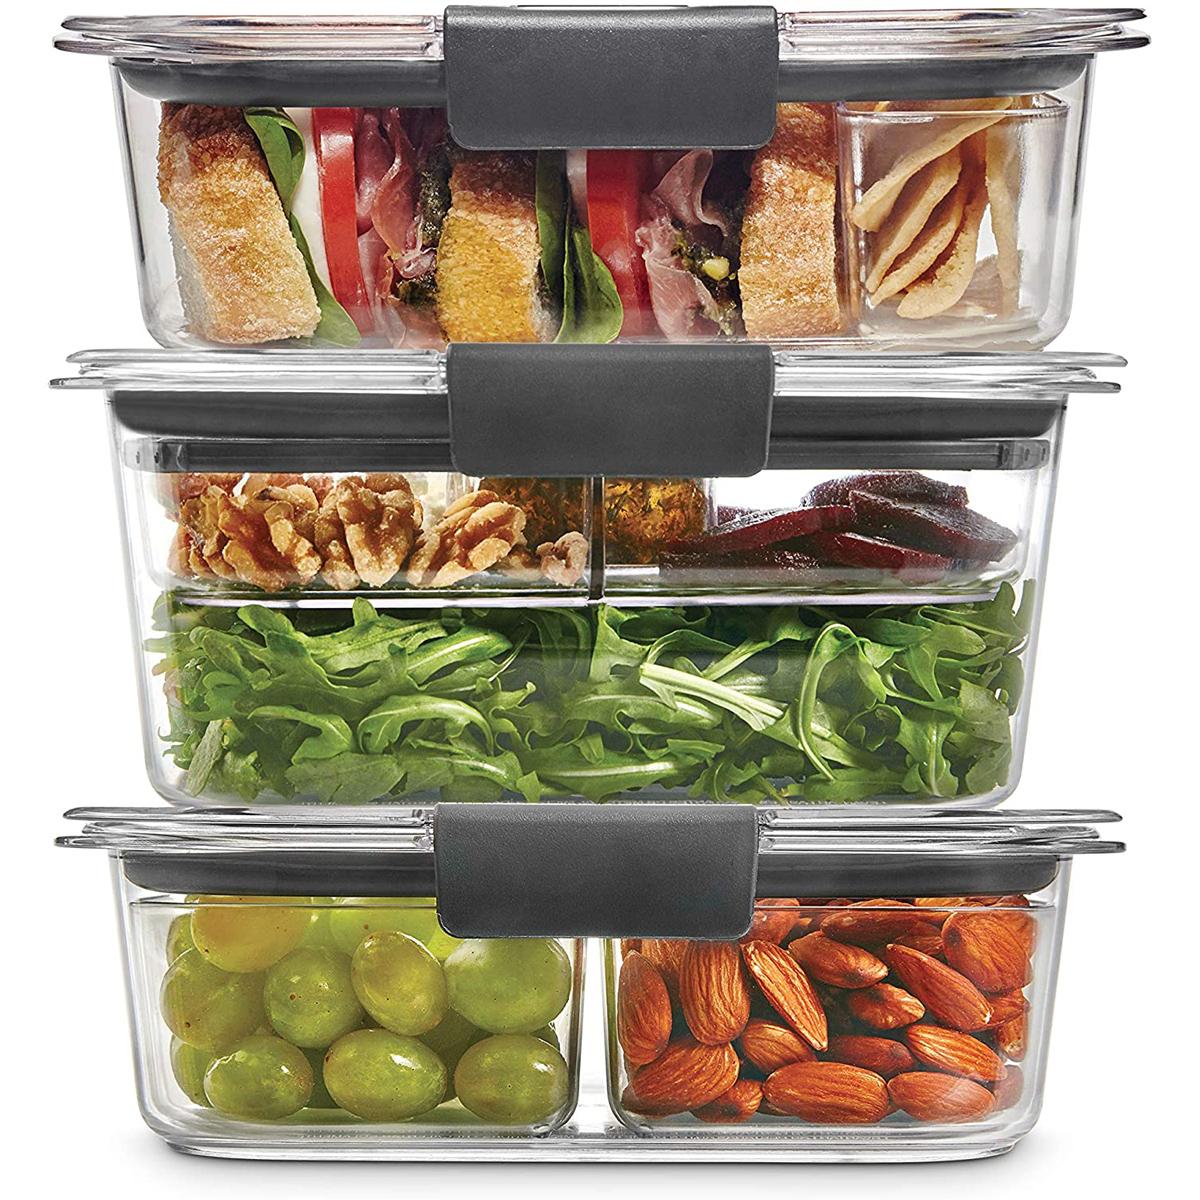 Rubbermaid Leak-Proof Brilliance Food Storage Containers for $14.19